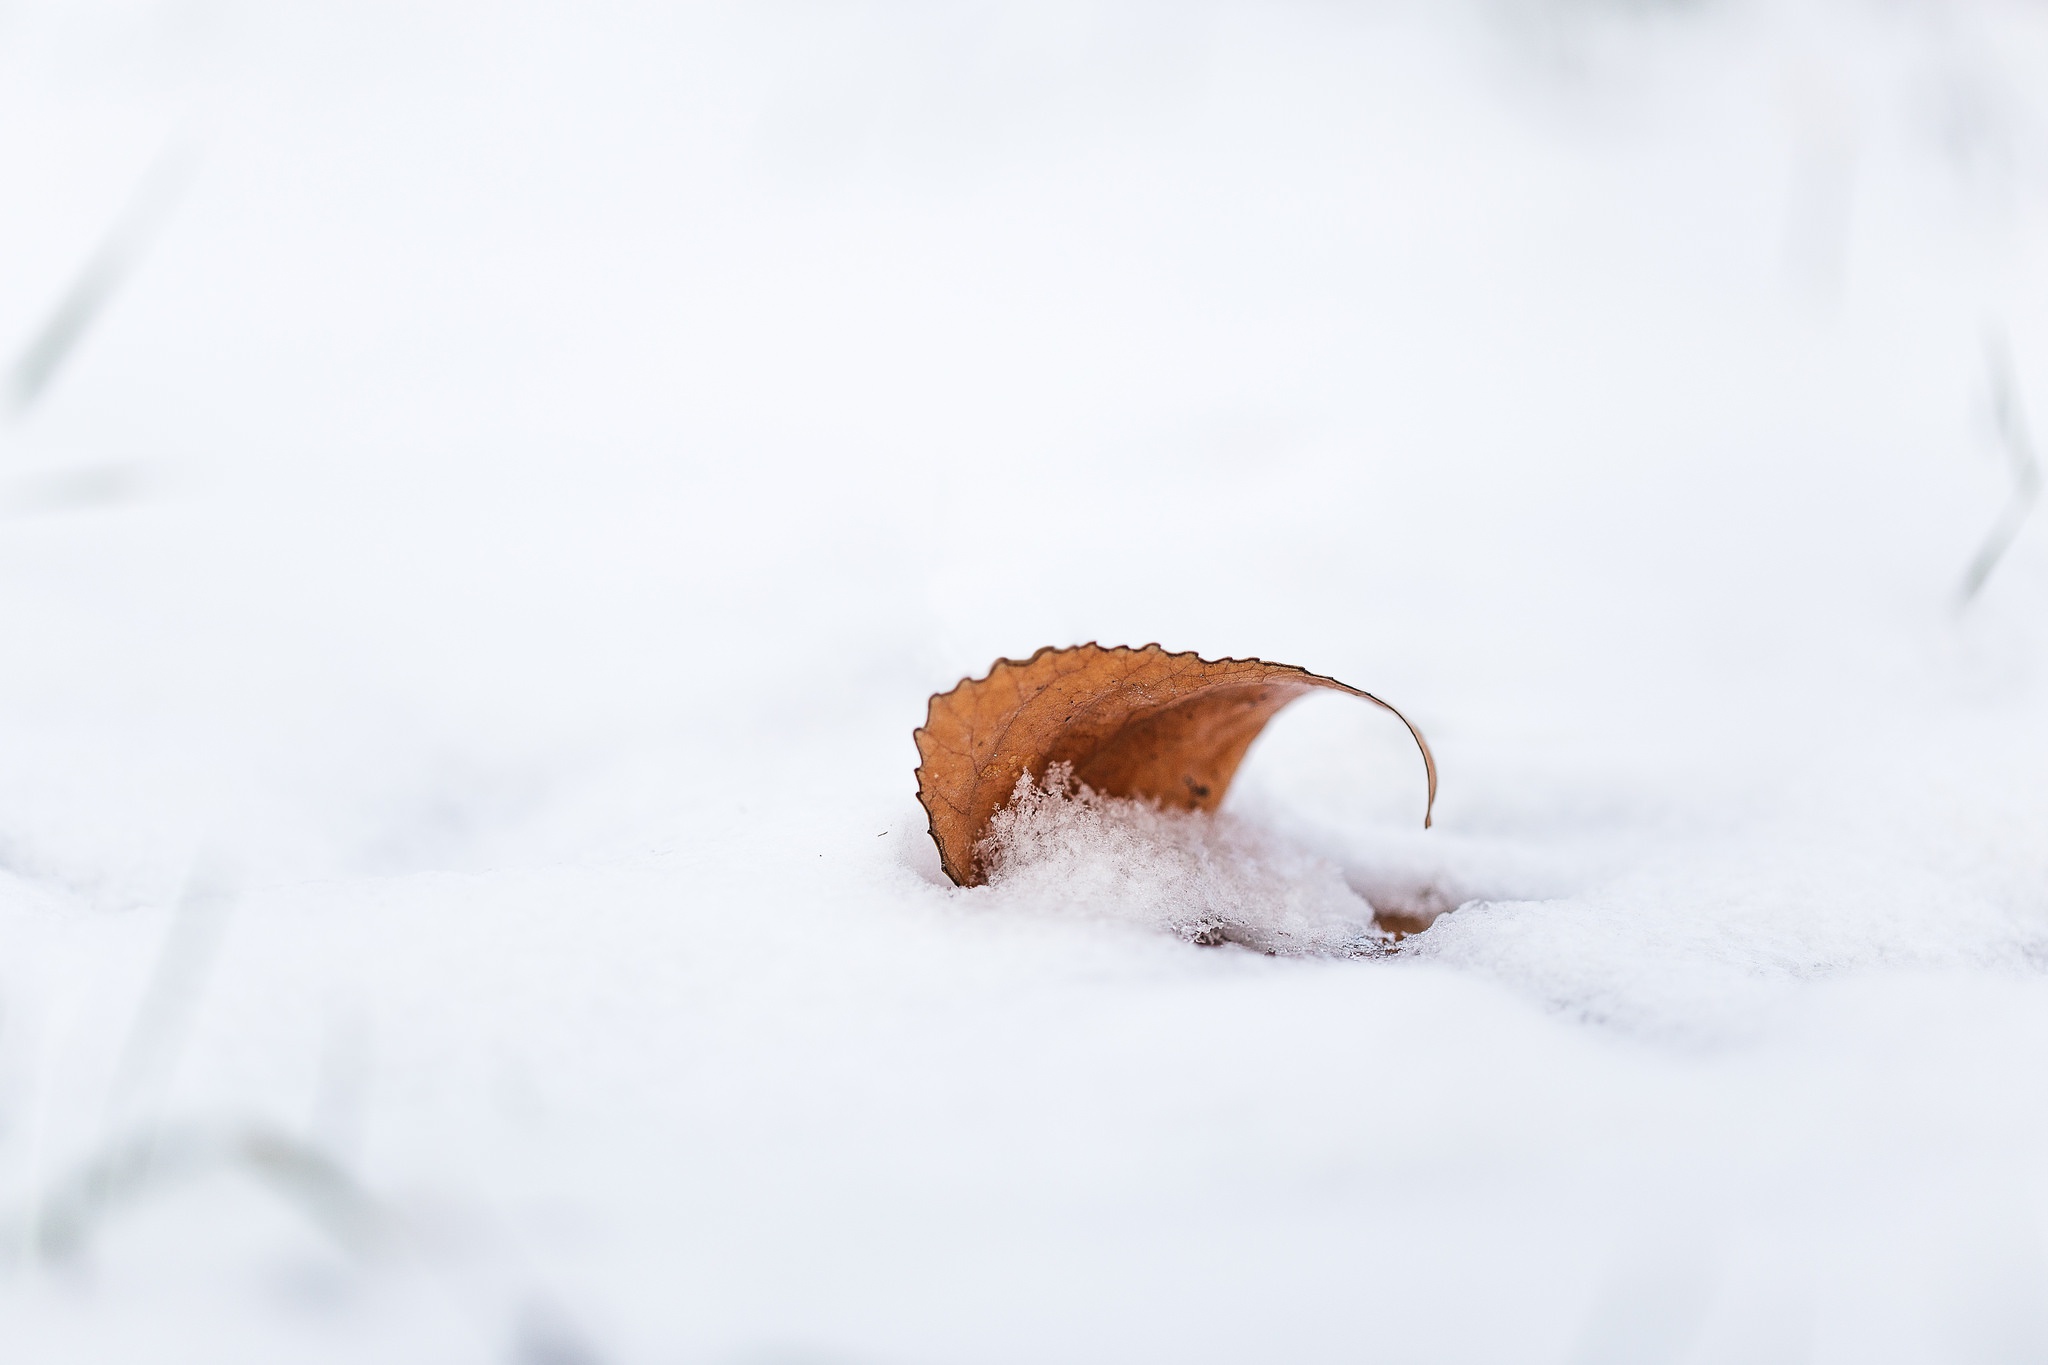 General 2048x1365 minimalism leaves cold winter snow simple background